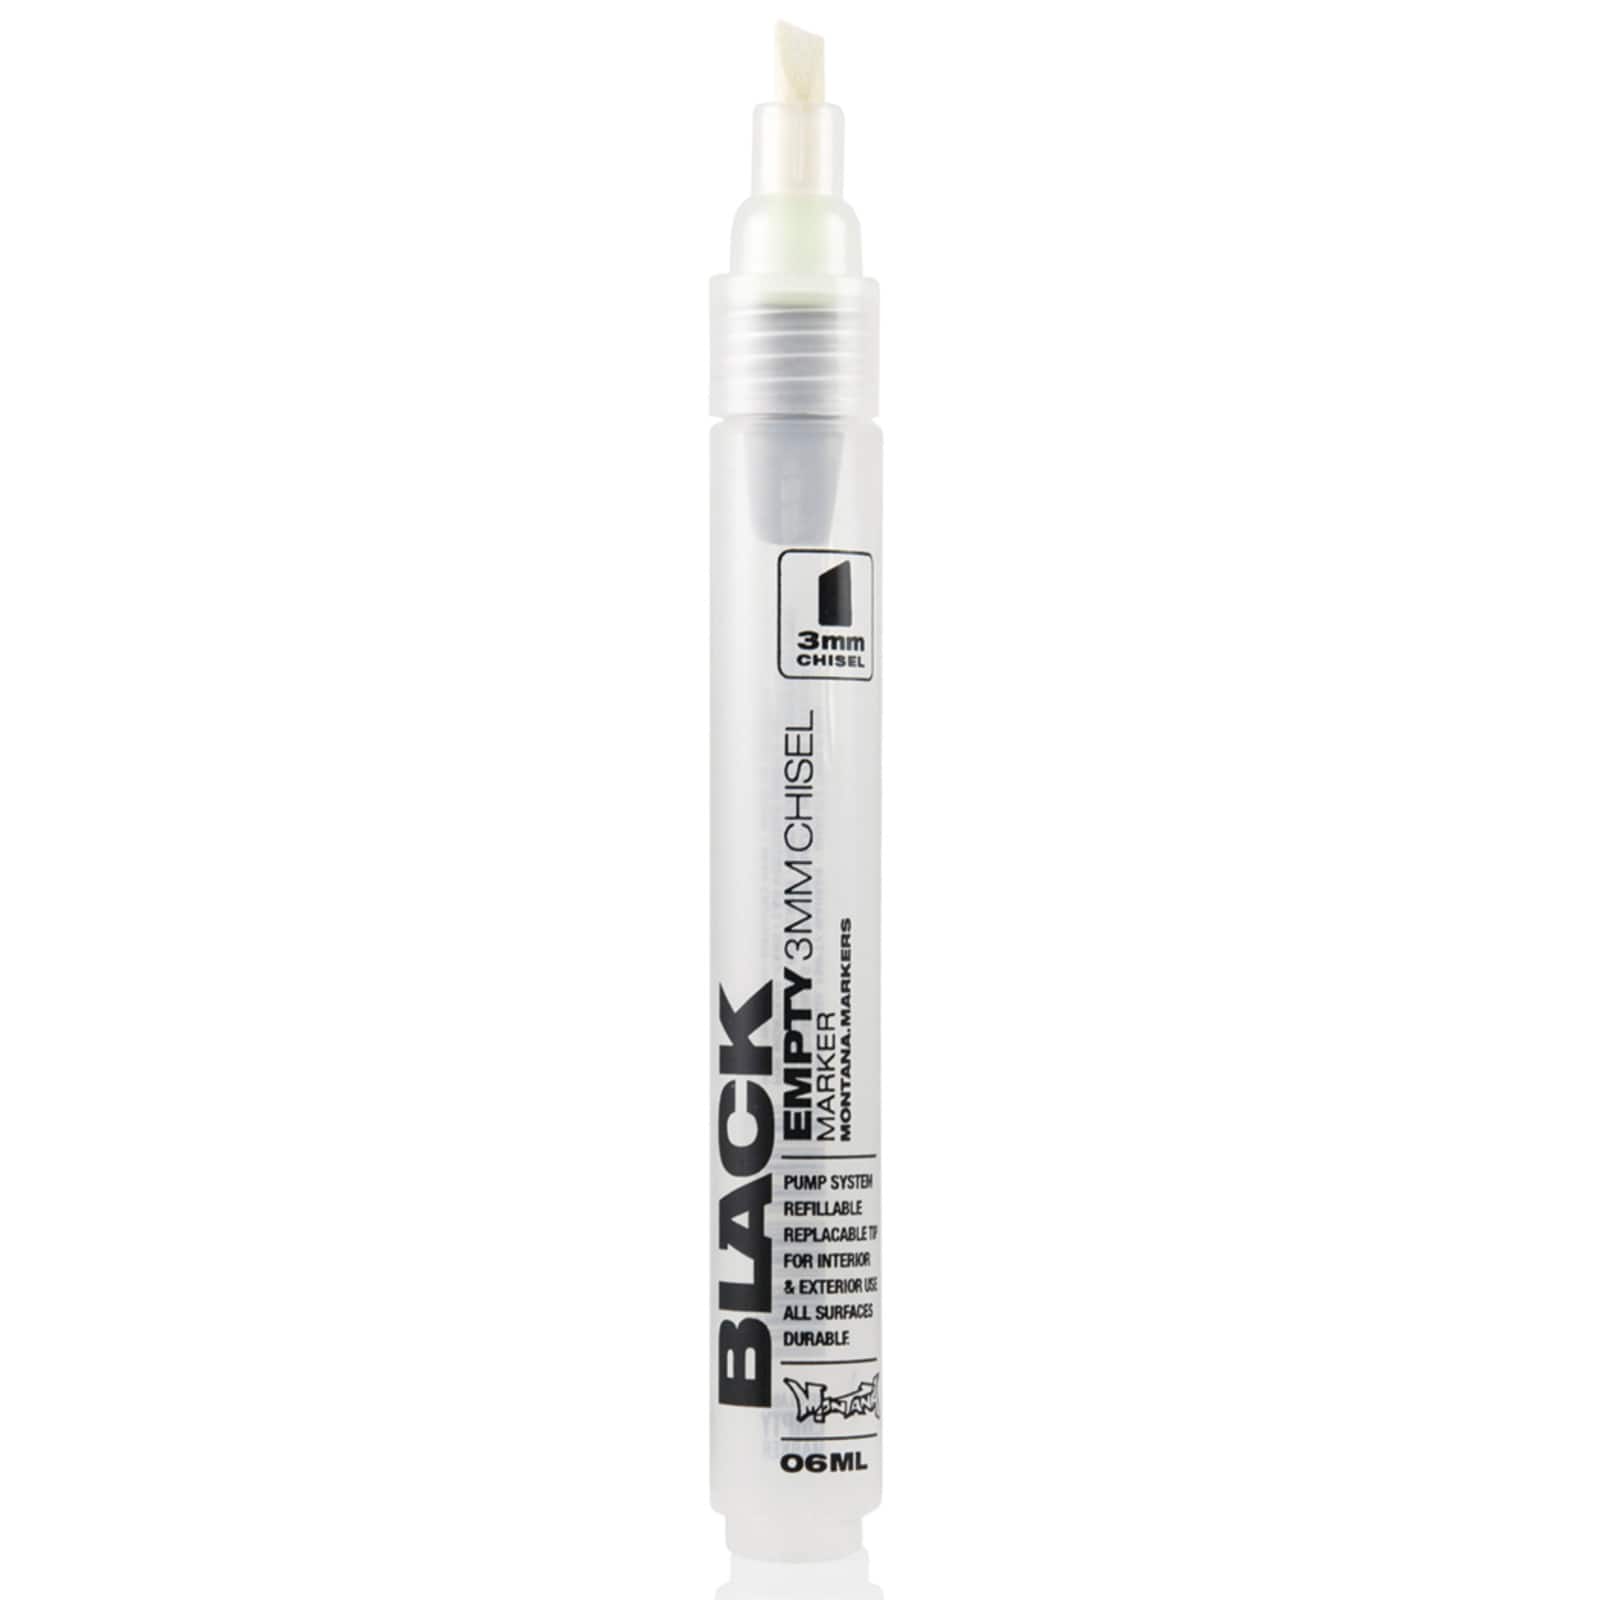 Montana Black 3mm Chisel Tip Empty Marker from Michaels